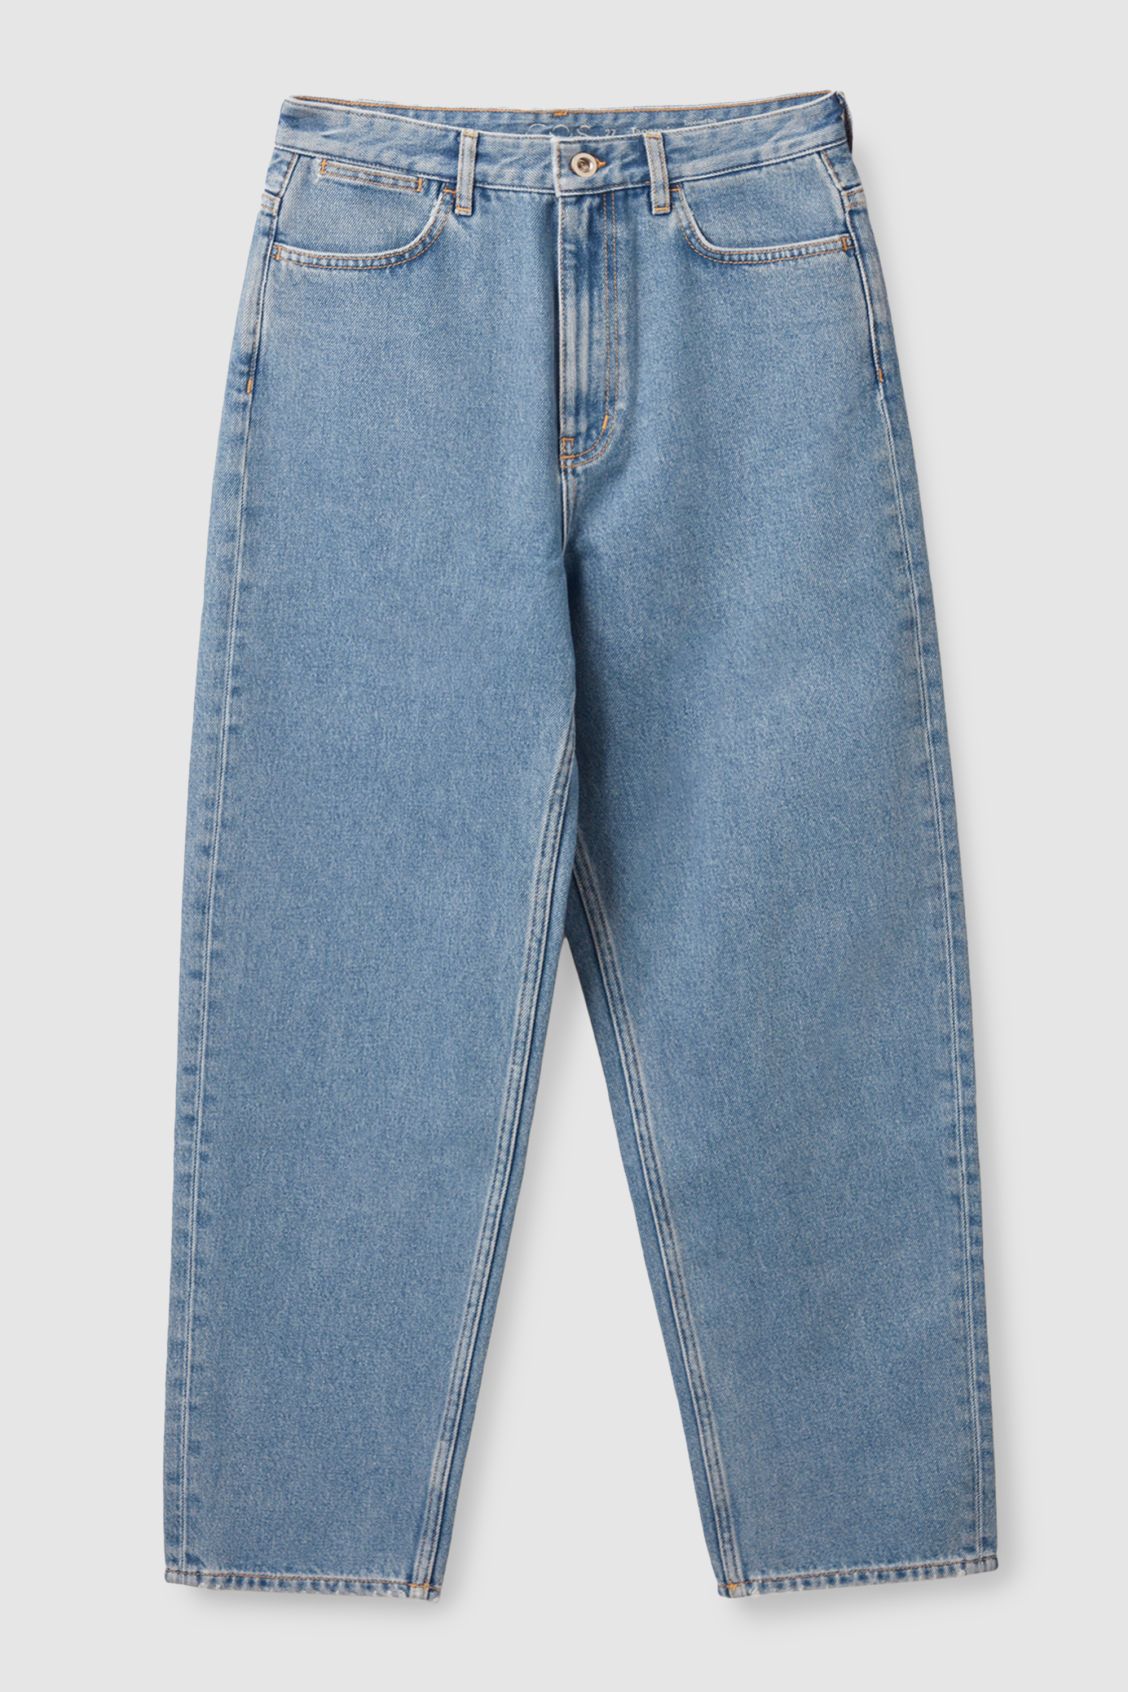 TAPERED ANKLE-LENGTH JEANS | COS UK